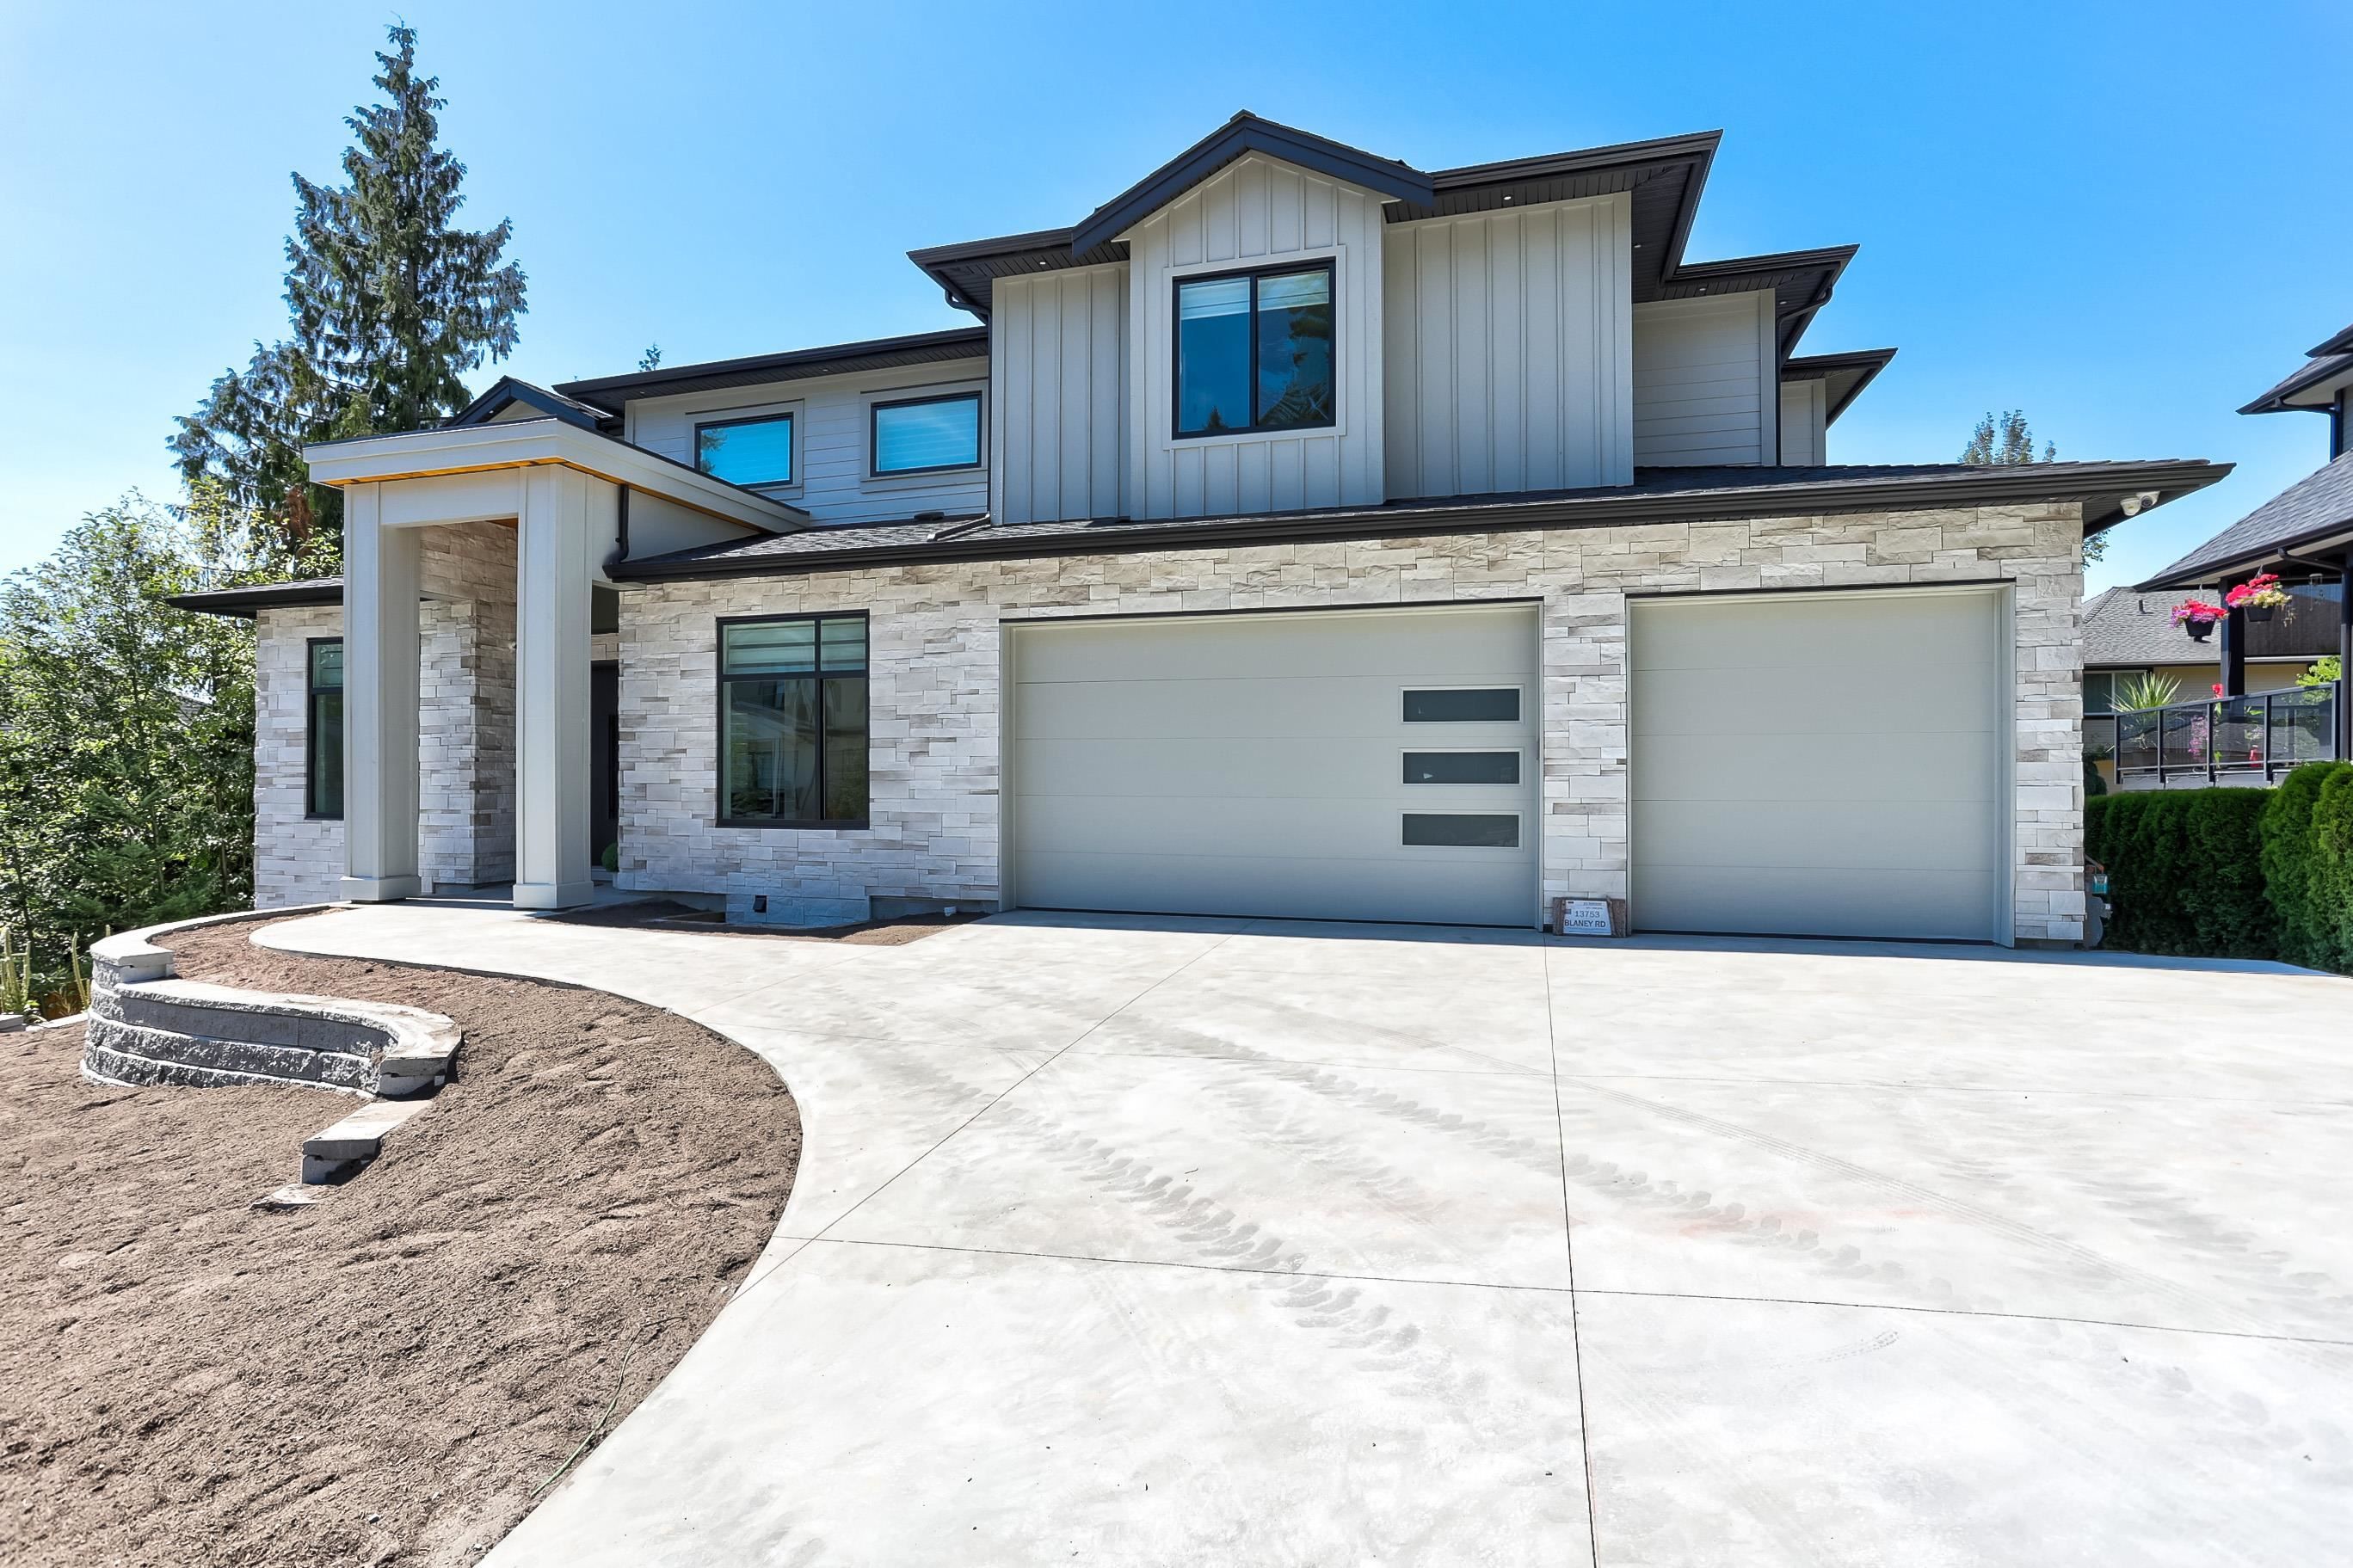 New property listed in Silver Valley, Maple Ridge